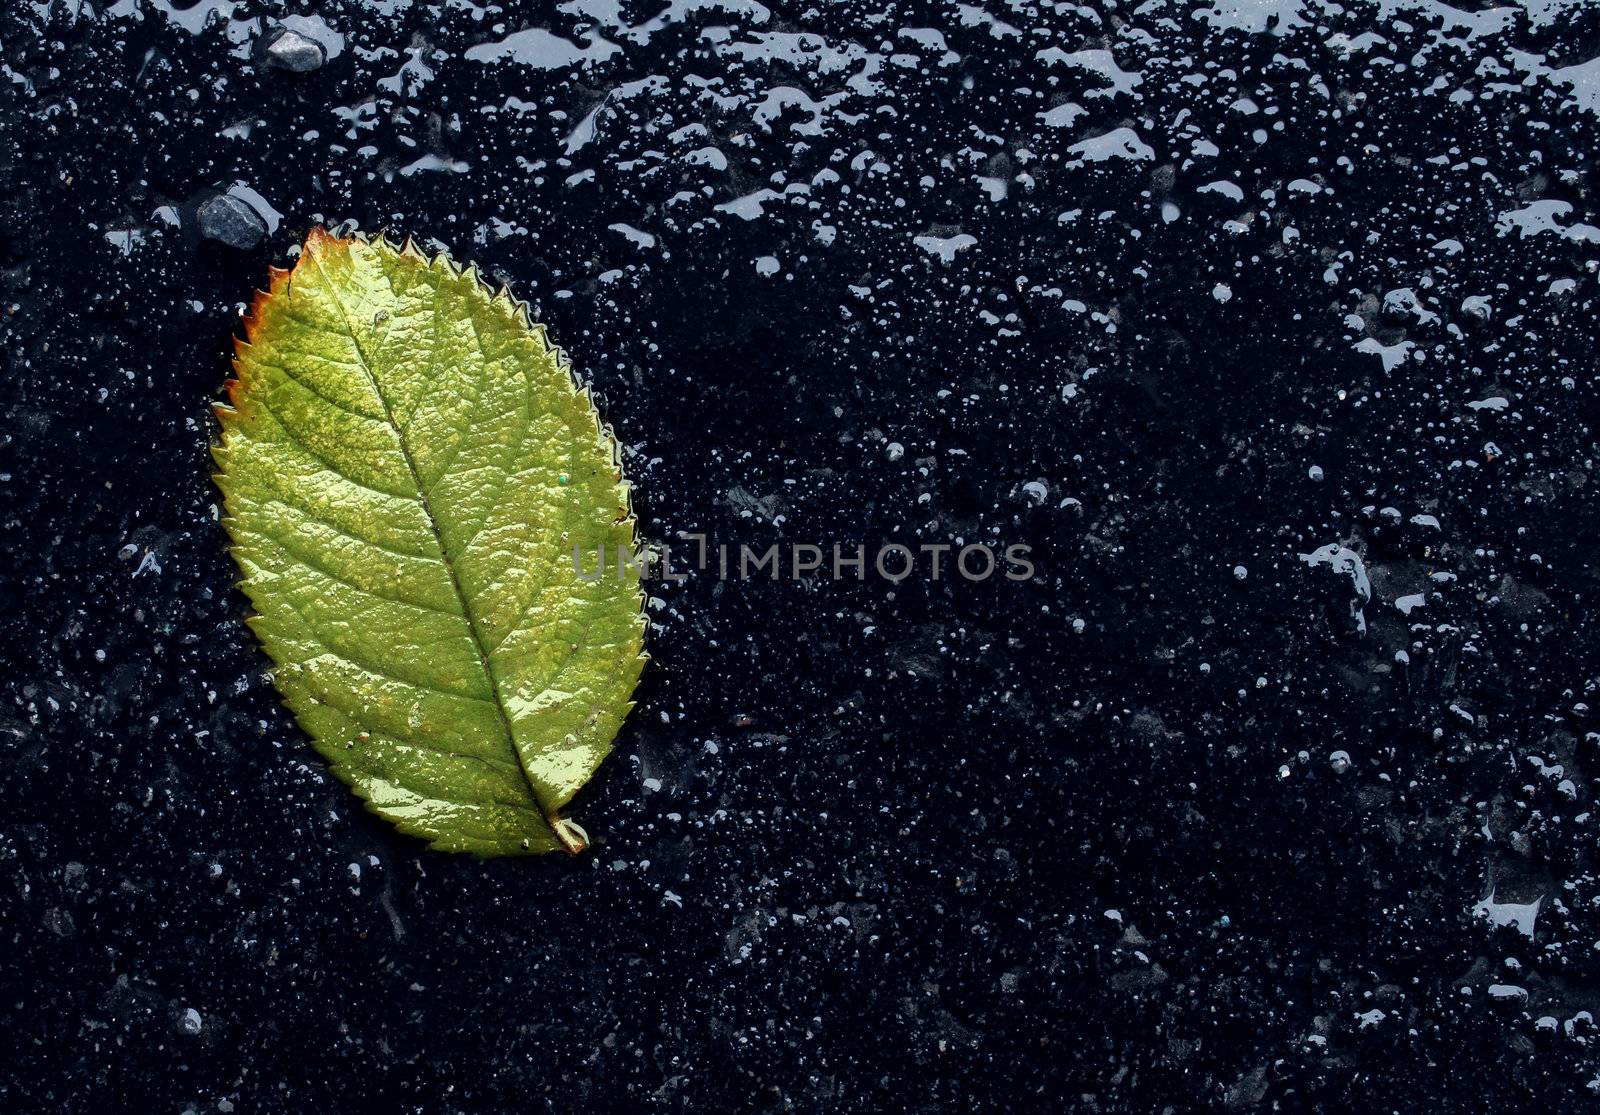 Wet Leaf by brightsource